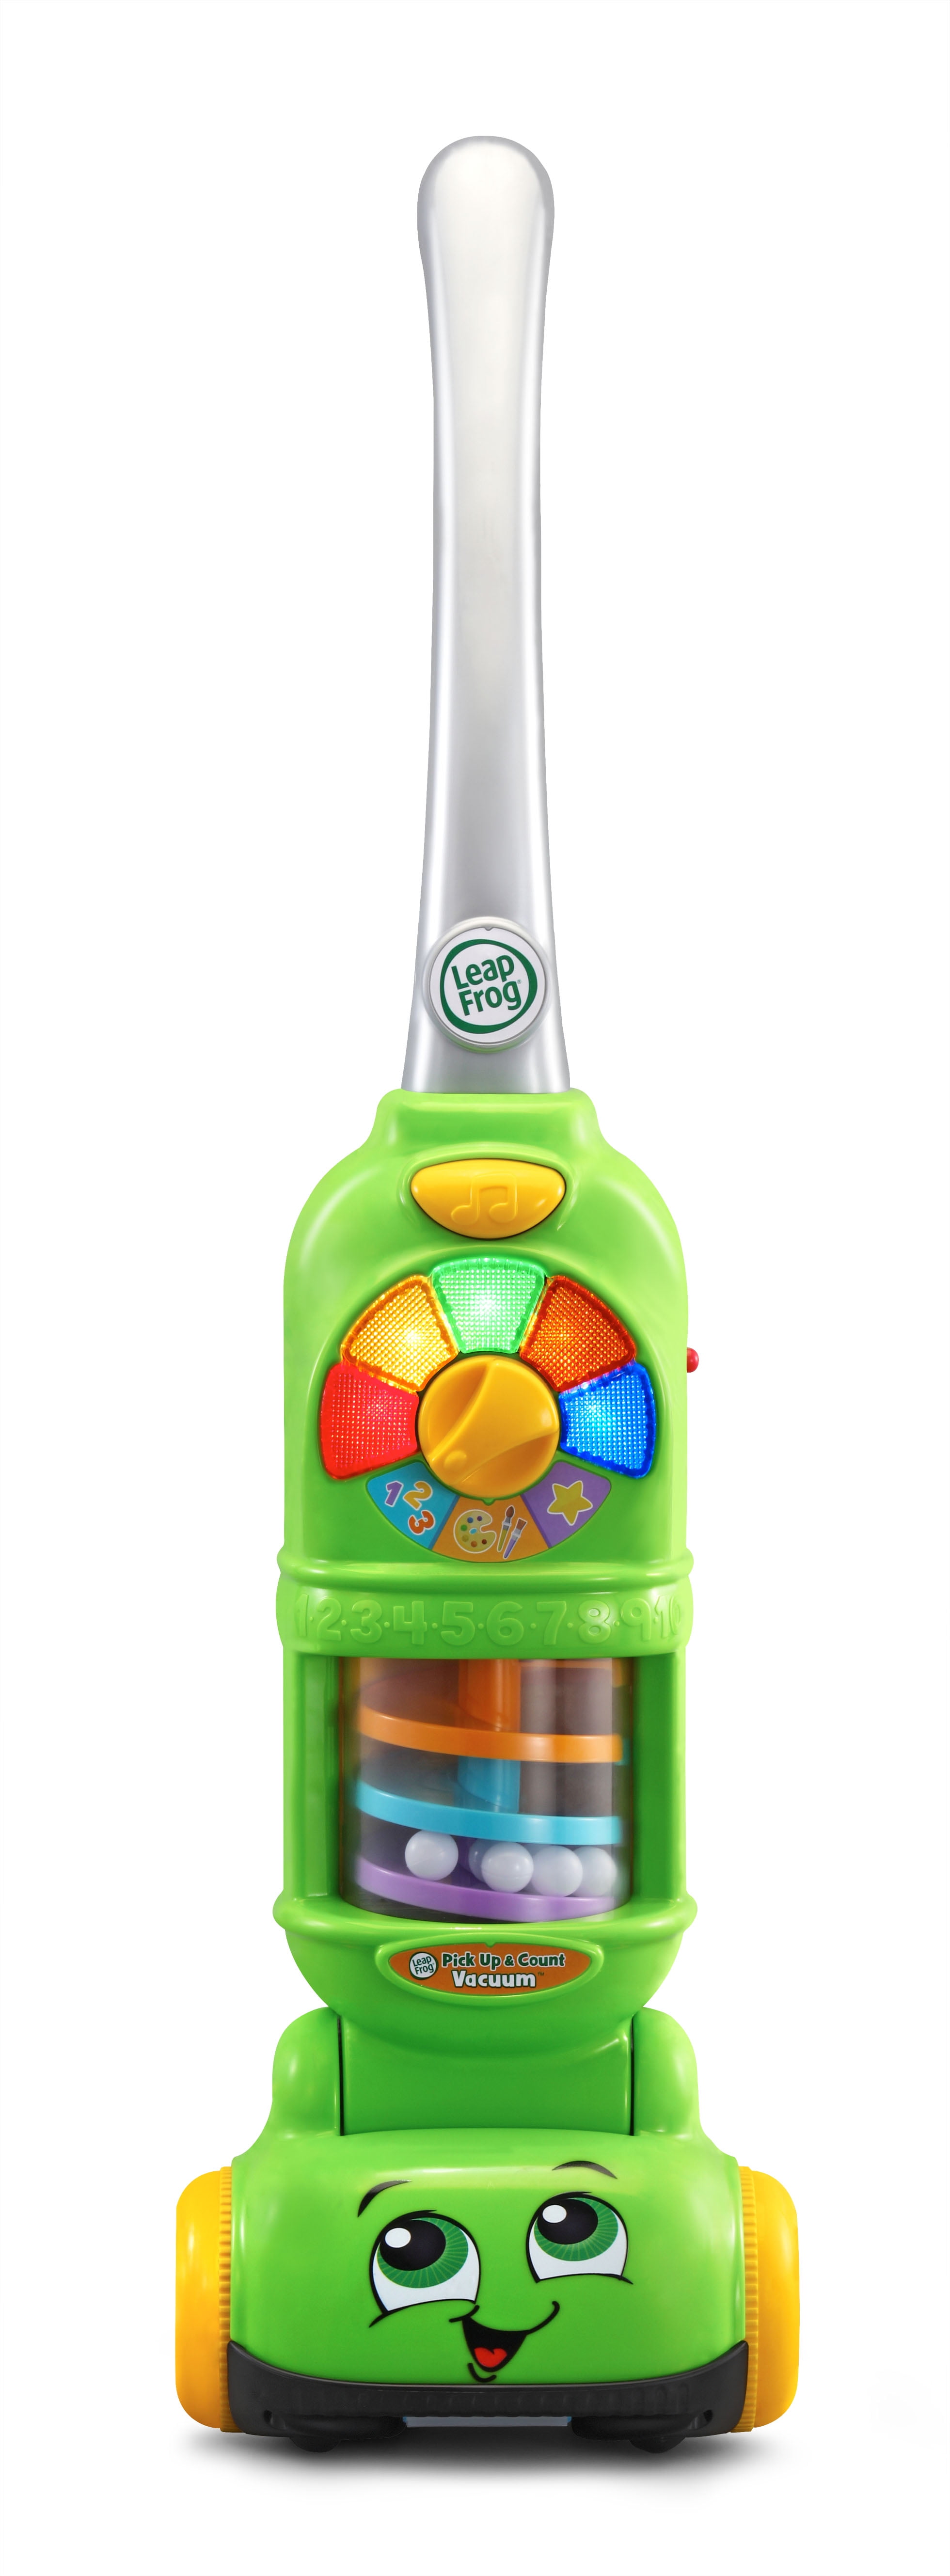 LeapFrog Pick Up and Count Vacuum With 10 Colorful Play Pieces